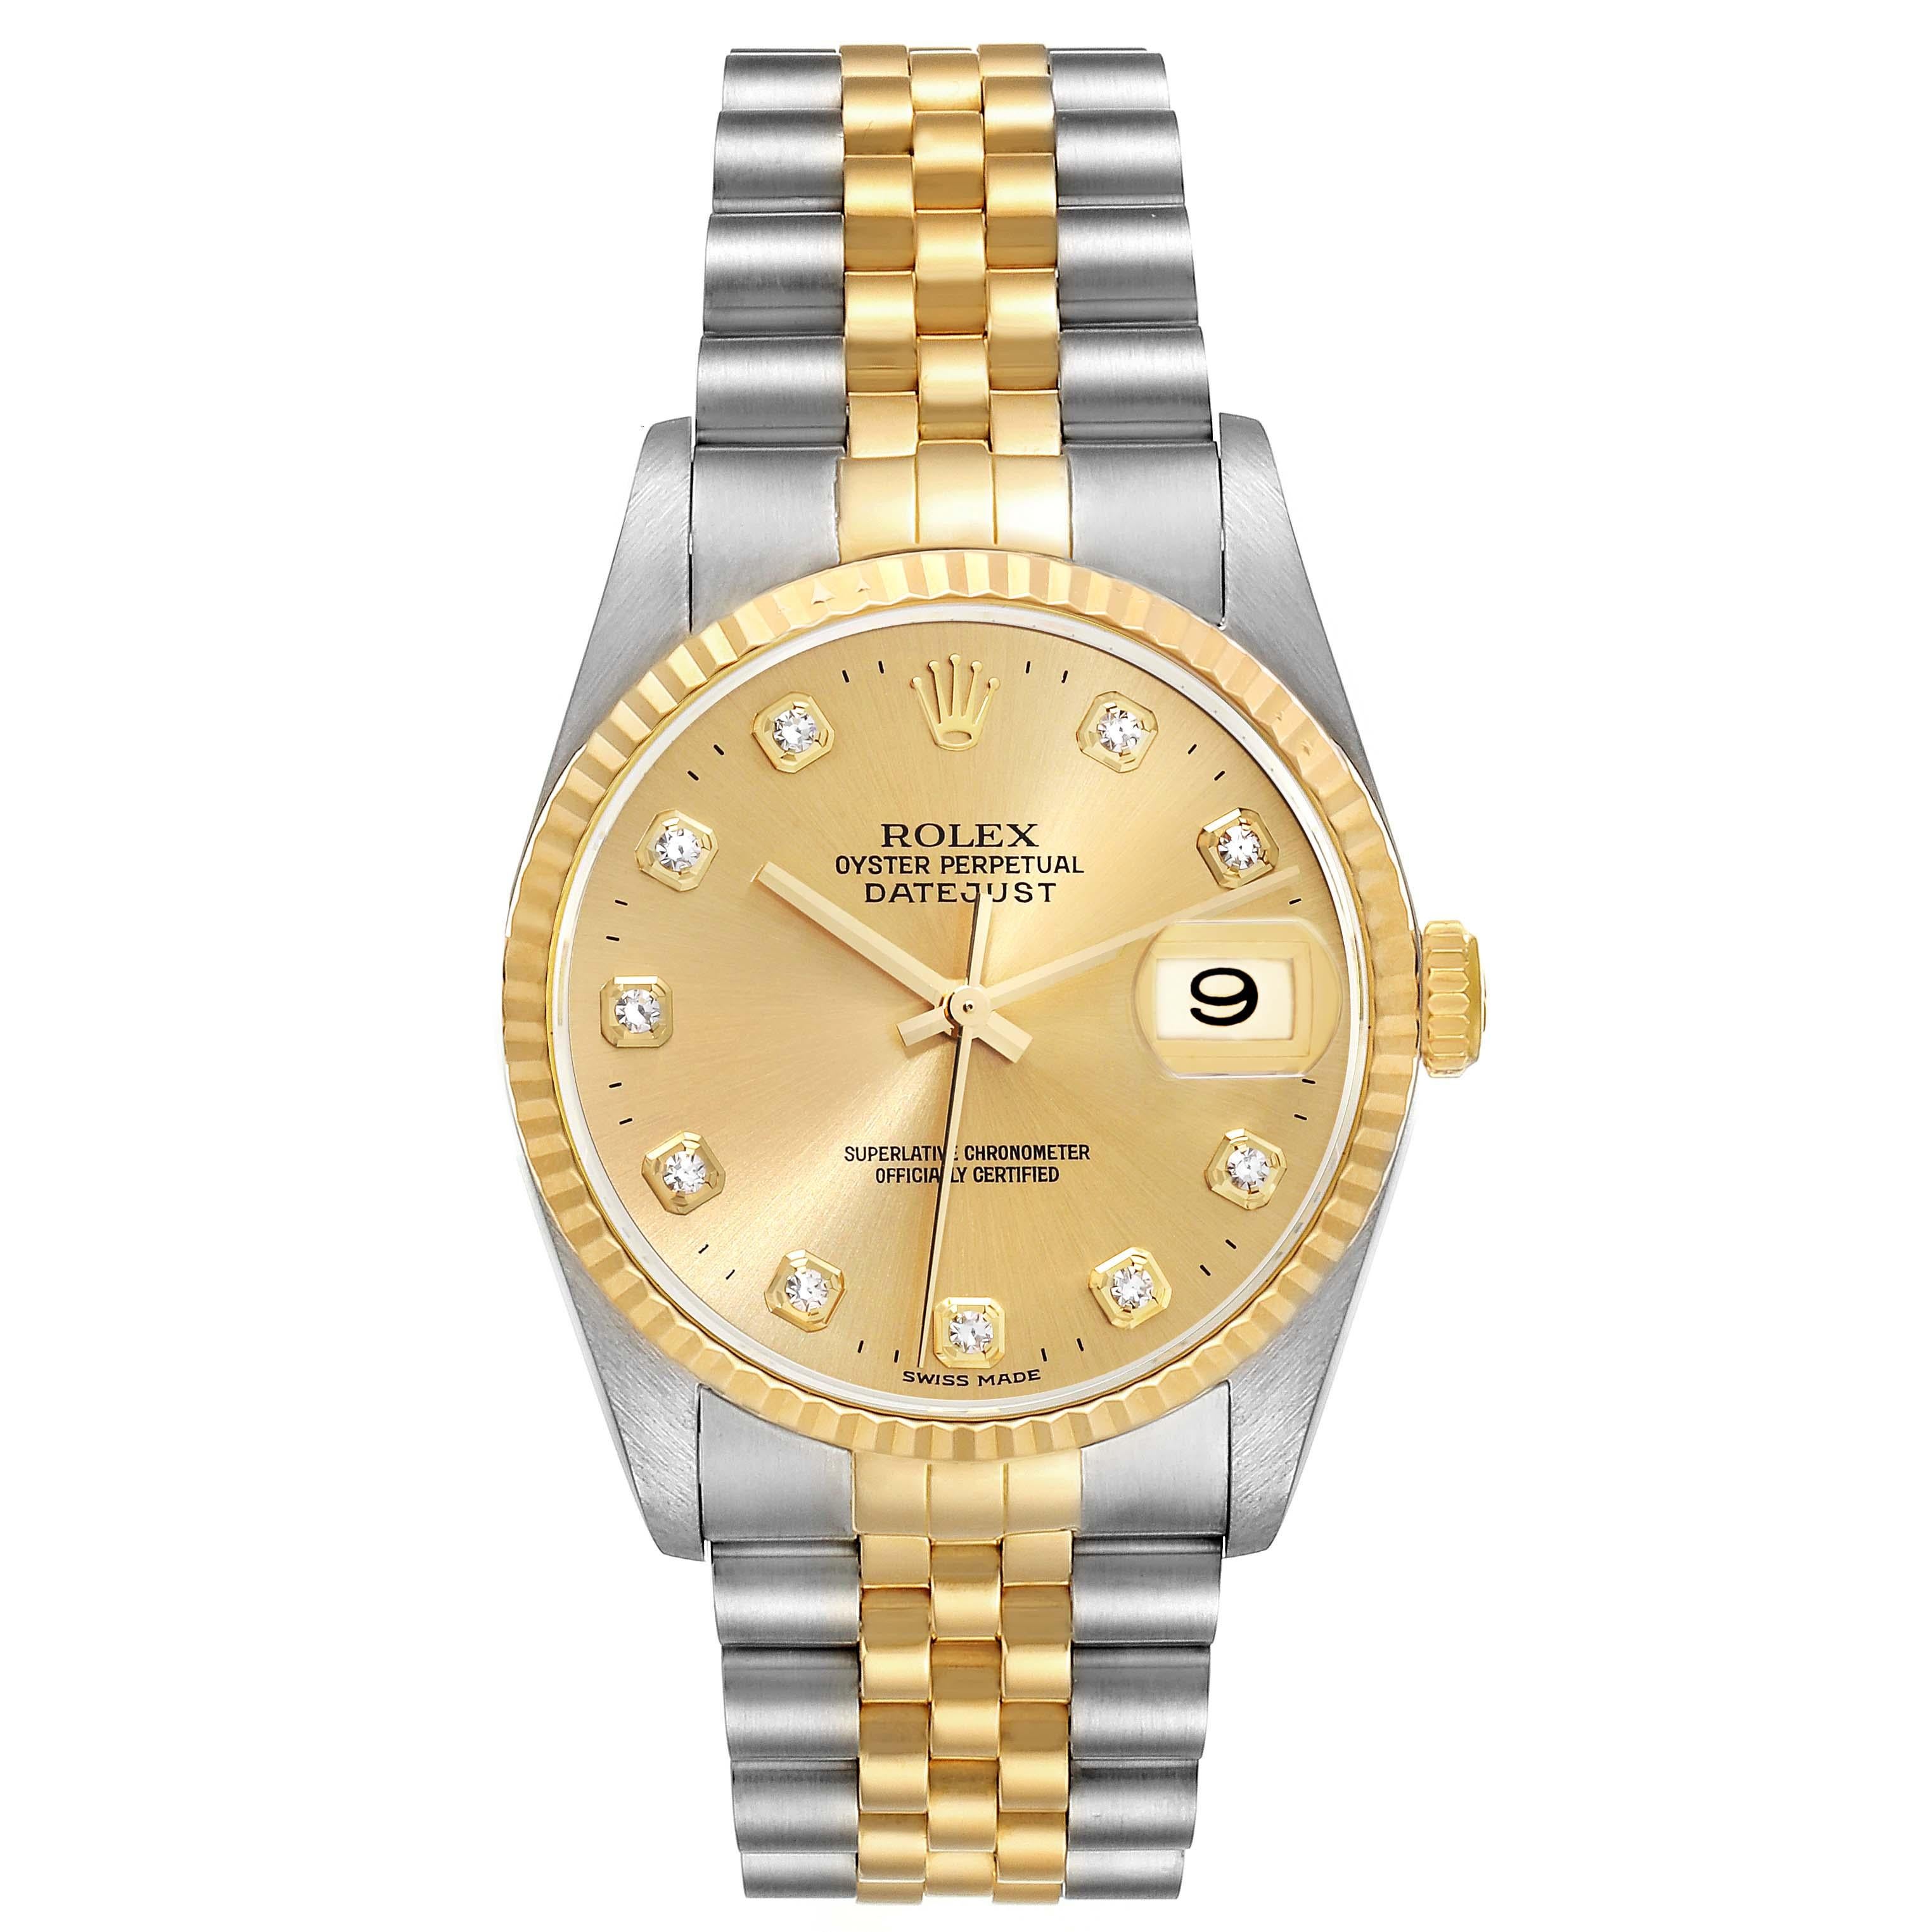 Rolex Datejust Steel Yellow Gold Diamond Dial Mens Watch 16233 Box Papers. Officially certified chronometer automatic self-winding movement. Stainless steel case 36 mm in diameter.  Rolex logo on an 18K yellow gold crown. 18k yellow gold fluted